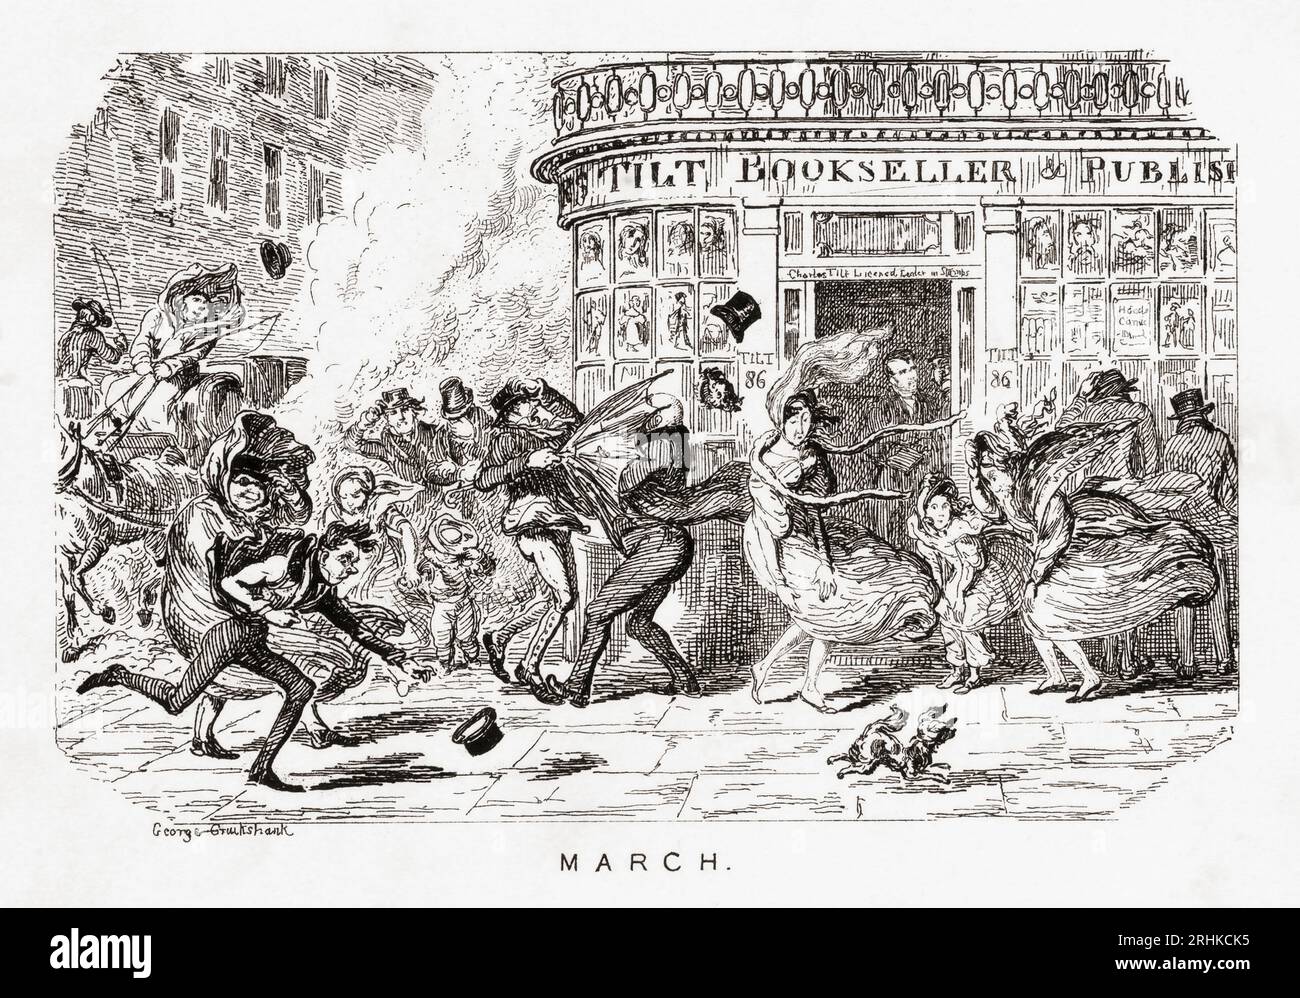 Pedestrians in front of Charles Tilt's bookshop on the corner of 86 Fleet Street and St. Bride’s Avenue battle the mad, March winds.  After the work by George Cruikshank. Stock Photo